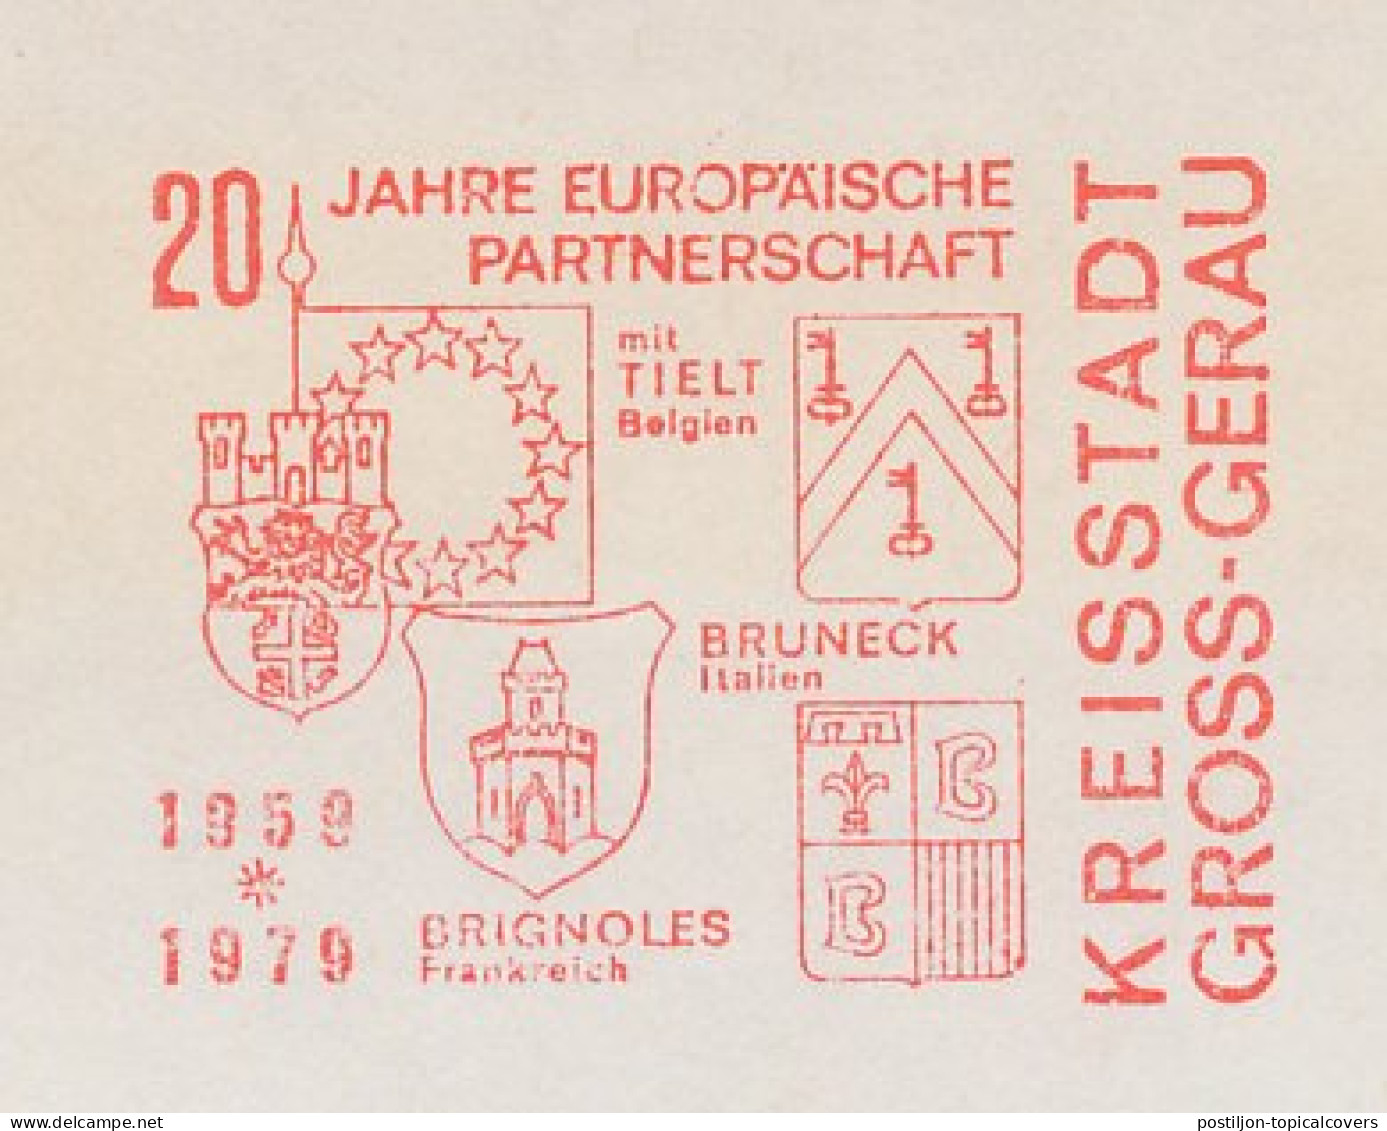 Meter Cover Germany 1979 20 Years European Partnership - Institutions Européennes